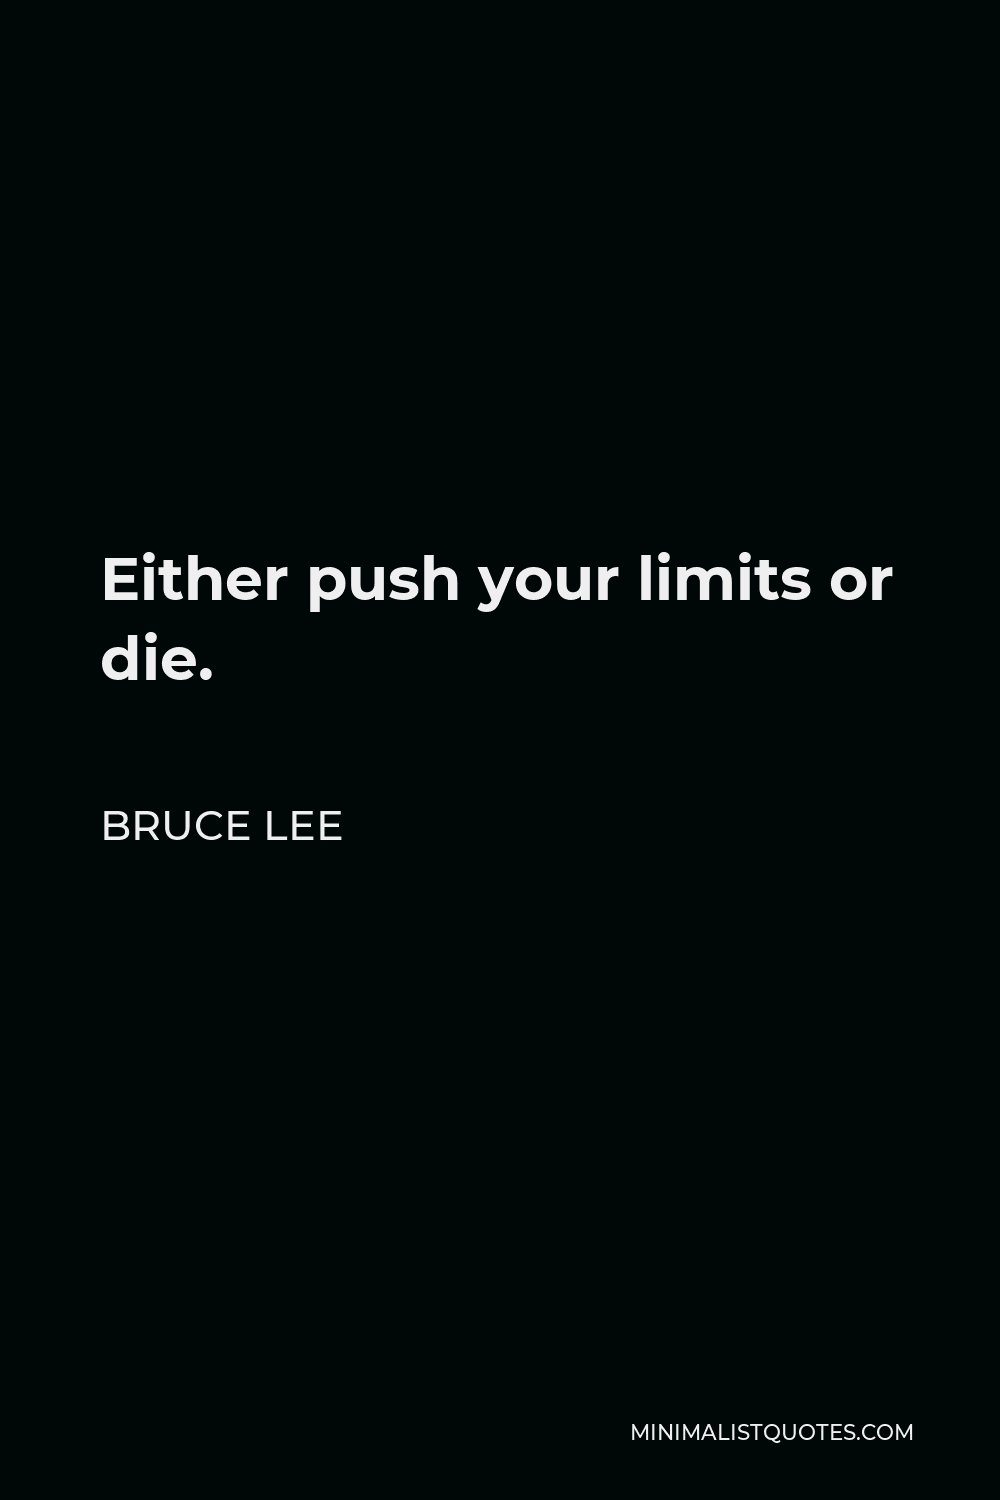 Bruce Lee Quote - Either push your limits or die.